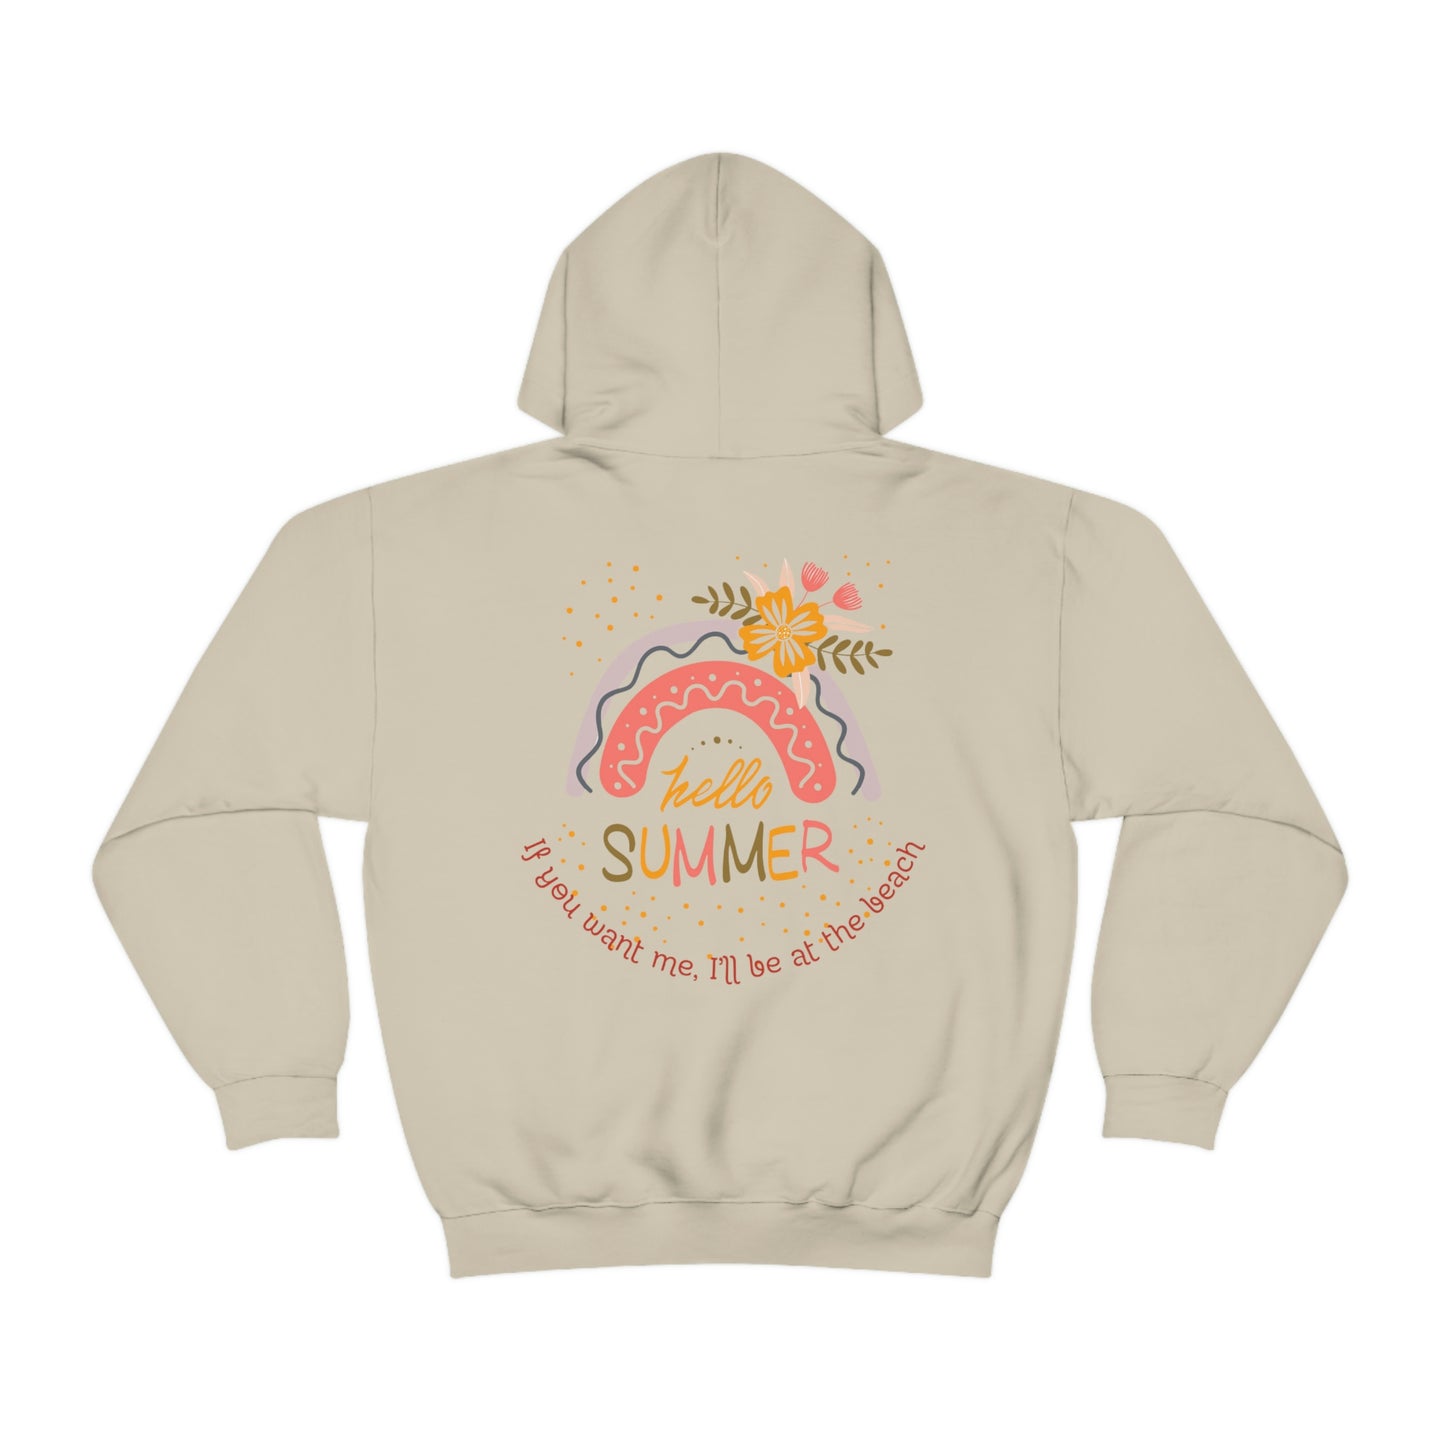 ‘If you want me, I’ll be at the beach’ Printed Front & Back. Unisex Heavy Blend™ Hooded Sweatshirt